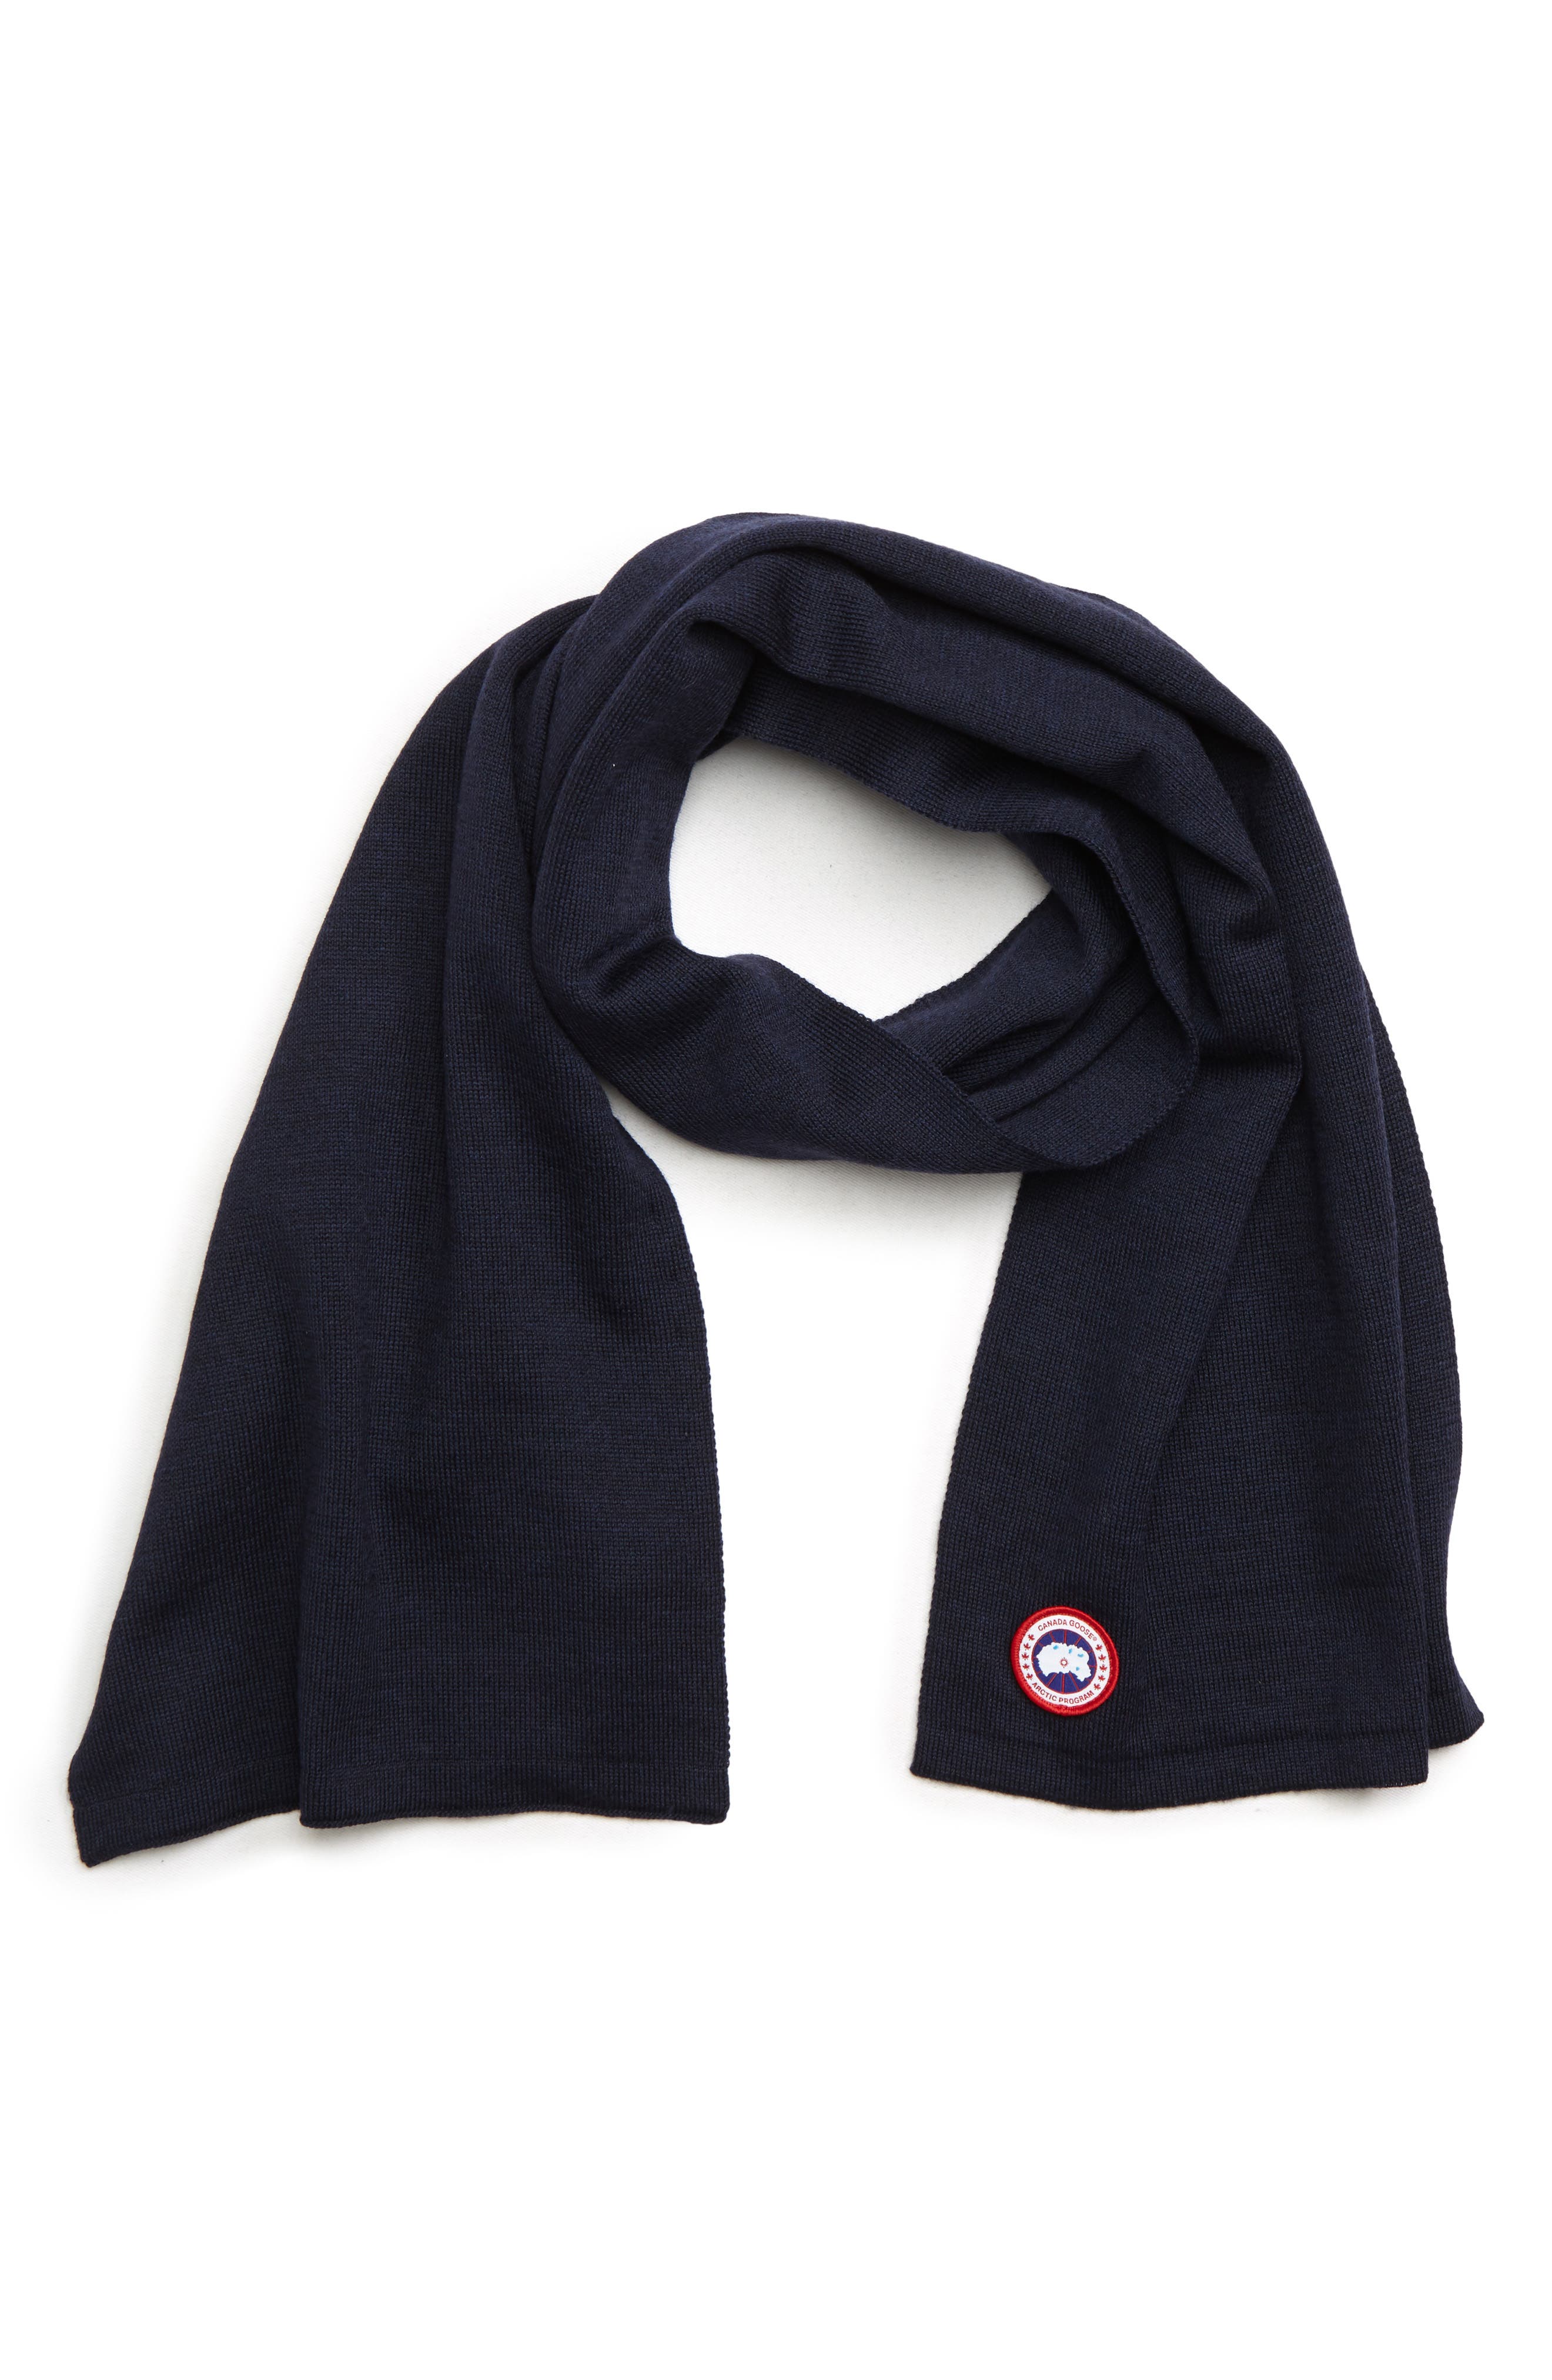 Canada Goose Merino Wool Scarf in Navy at Nordstrom